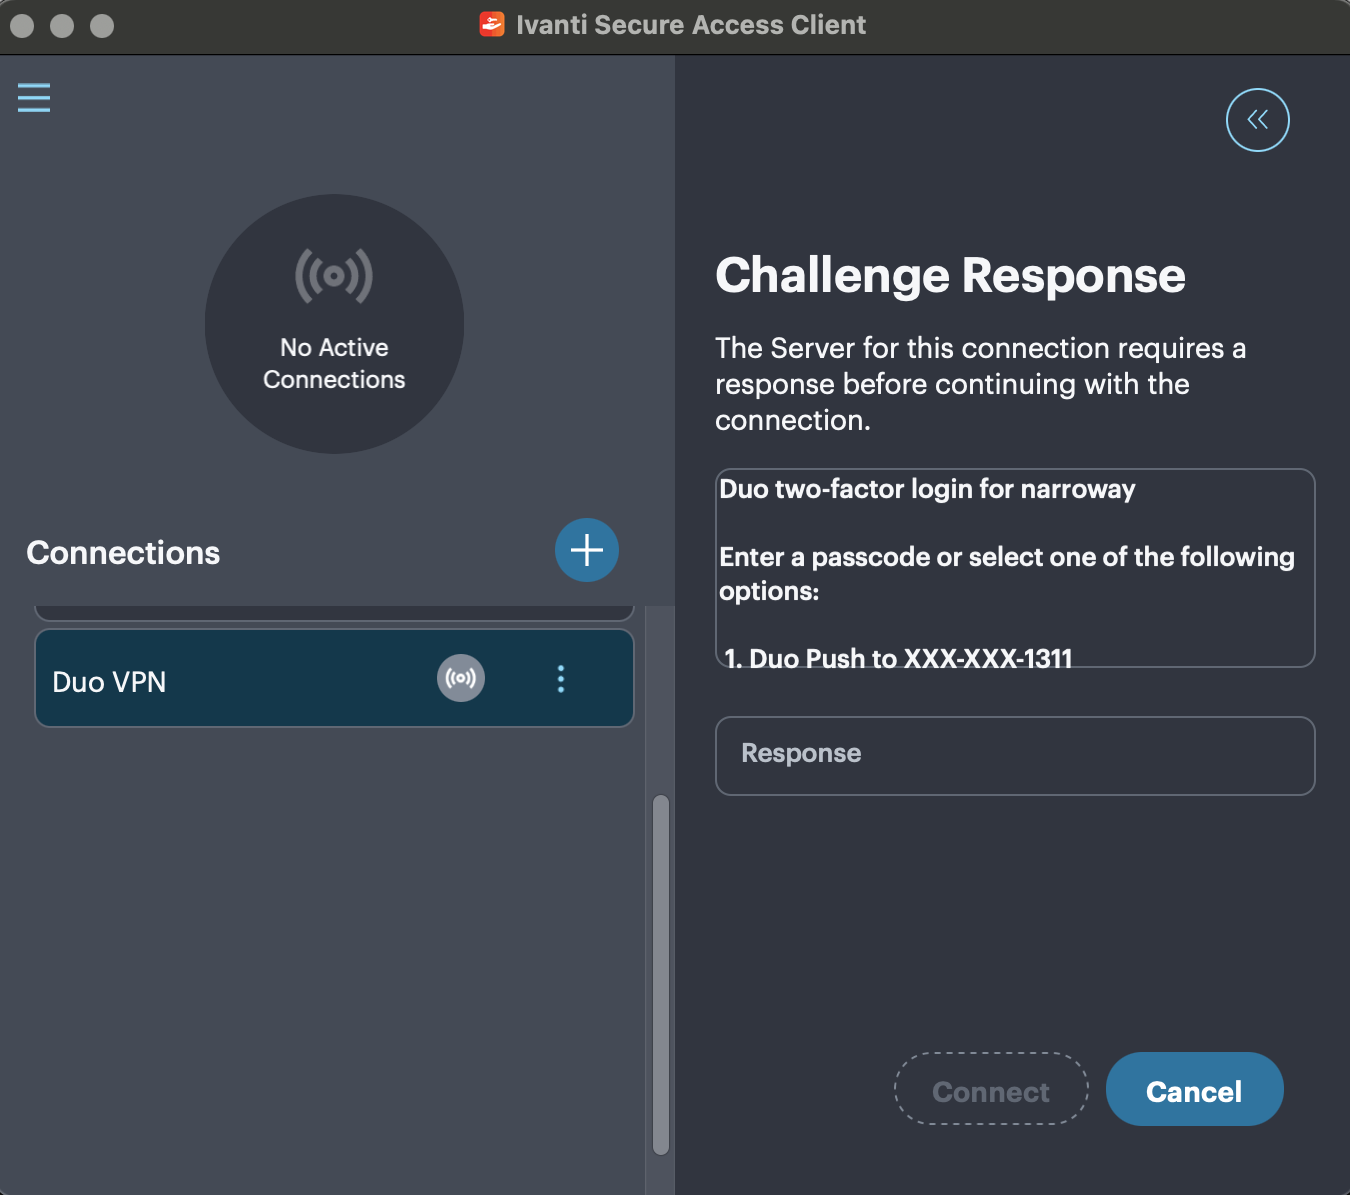 Ivanti Secure Access Client with Duo RADIUS Challenge